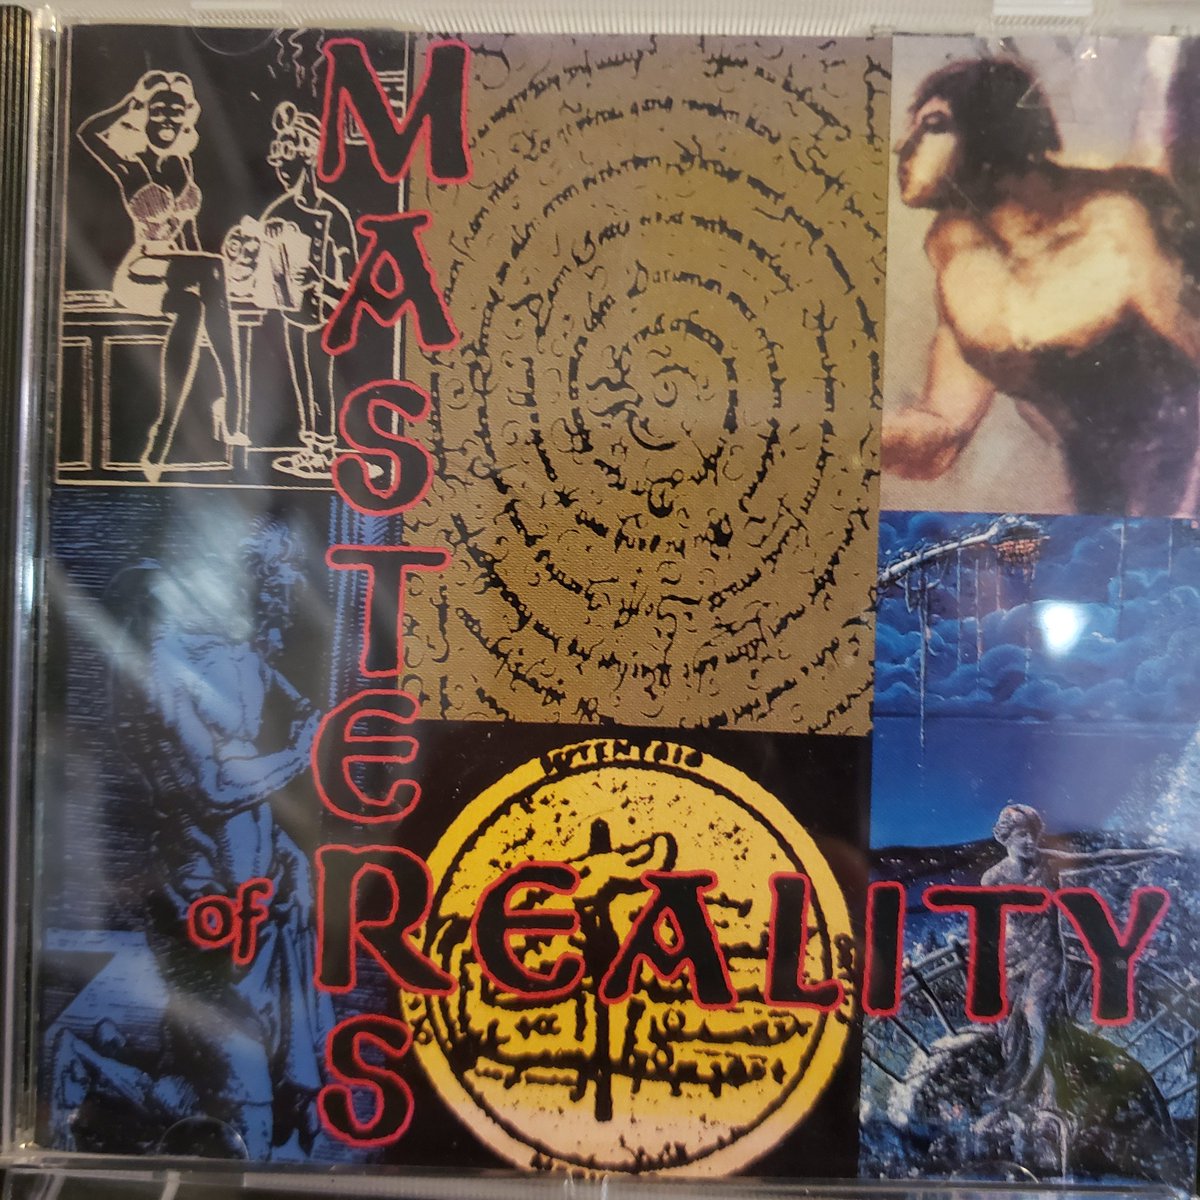 John Brown
Bring him down
Pull his body
To the ground
Left him up
For long enough
Let me be
The baby gruff
John Brown
Bring him down
Pull his body
To the ground
#mastersofreality
Do yourselves a favor and check these guys. The  singer Chris Goss has produce some amazing albums